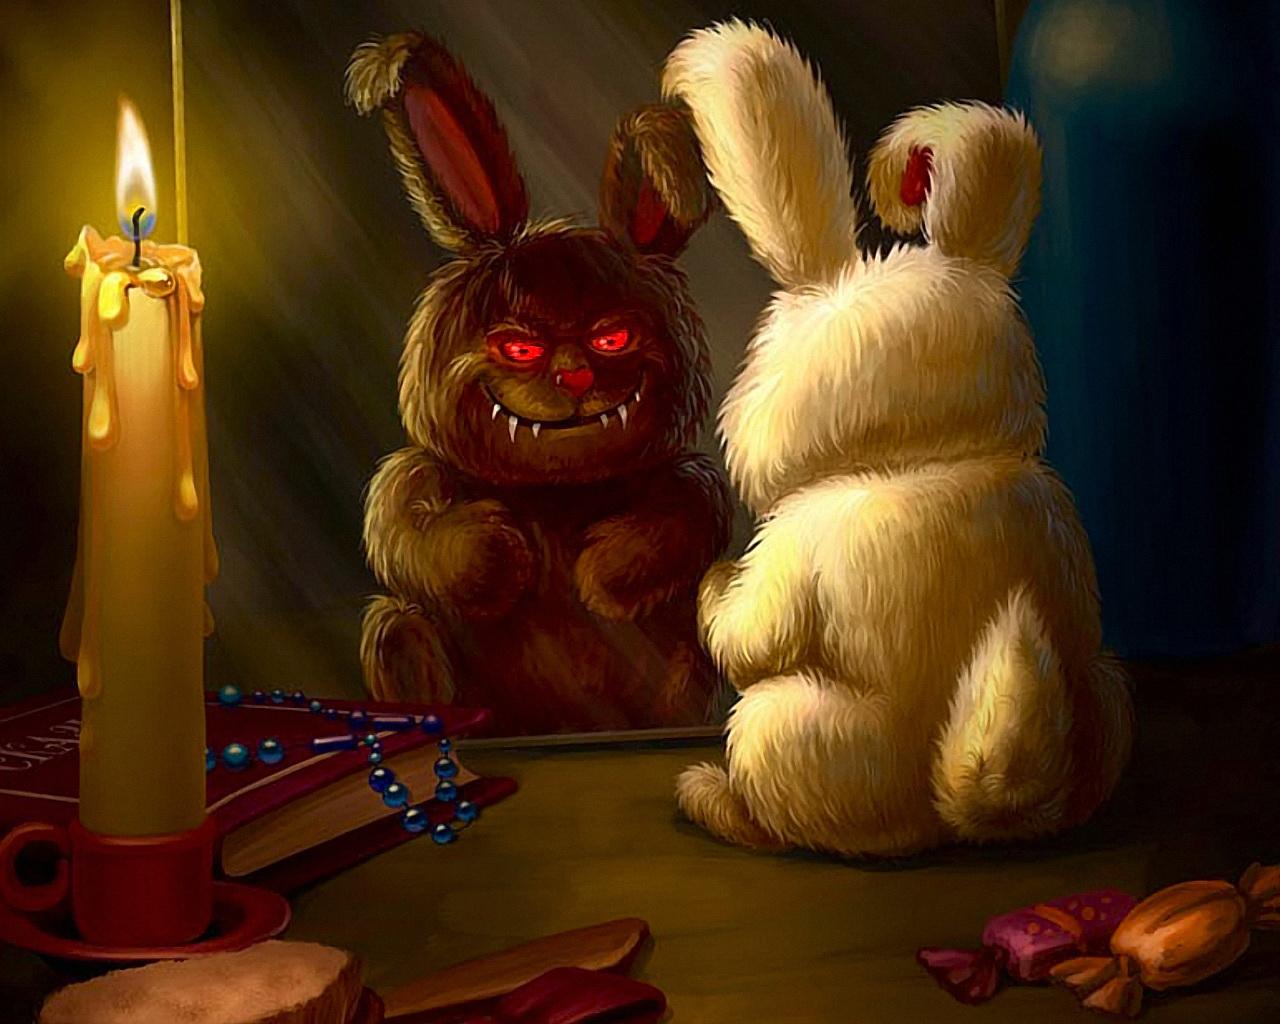 Bunny Candle Evil Horror Smile 1280x1024